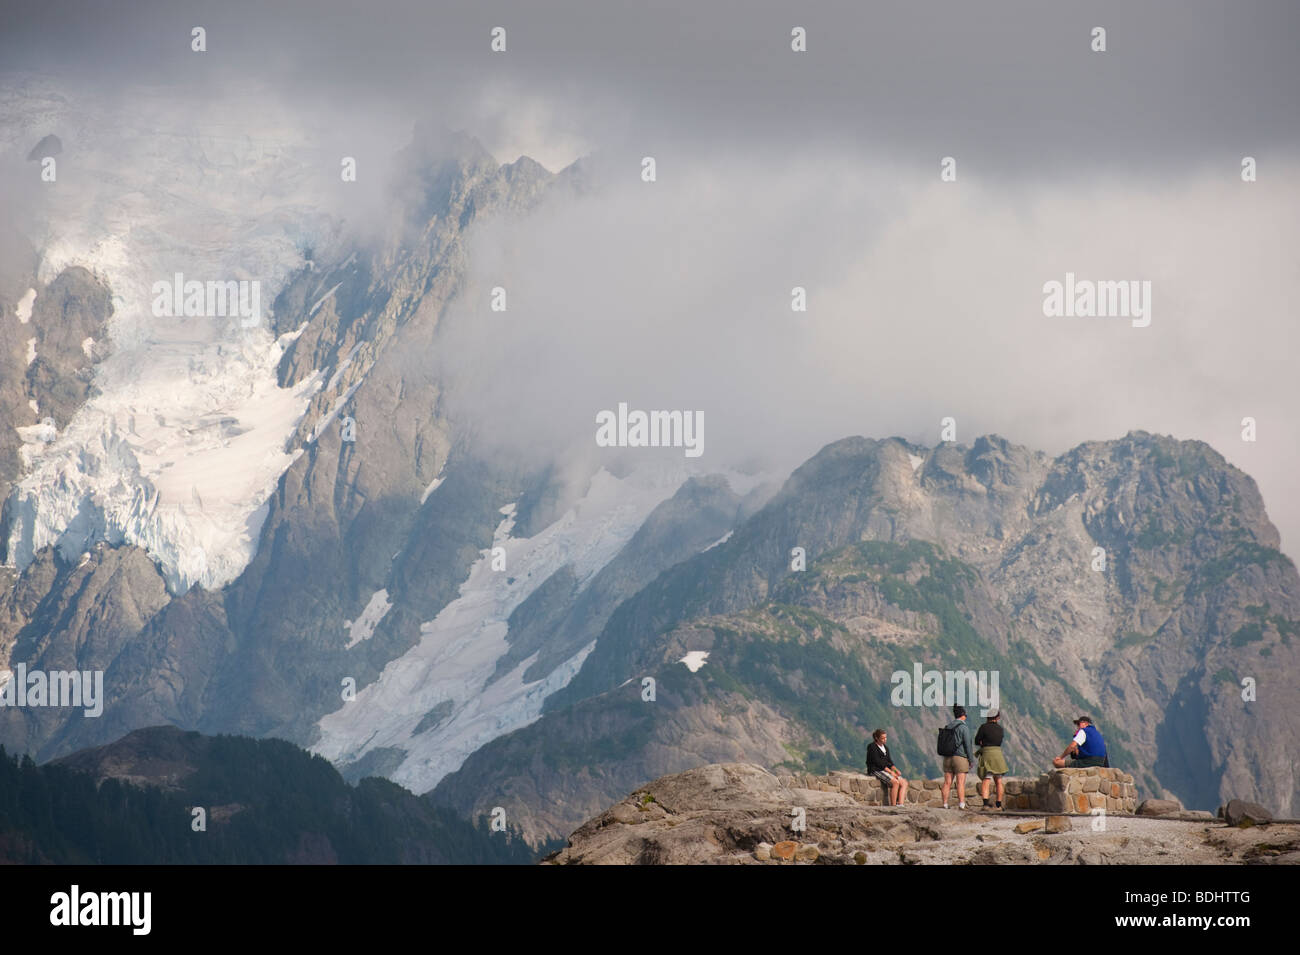 After finishing the Chain Lakes Trail at Mt. Baker, hikers rest at the foot of the glacier on Mt. Shuksan, Washington, USA. Stock Photo